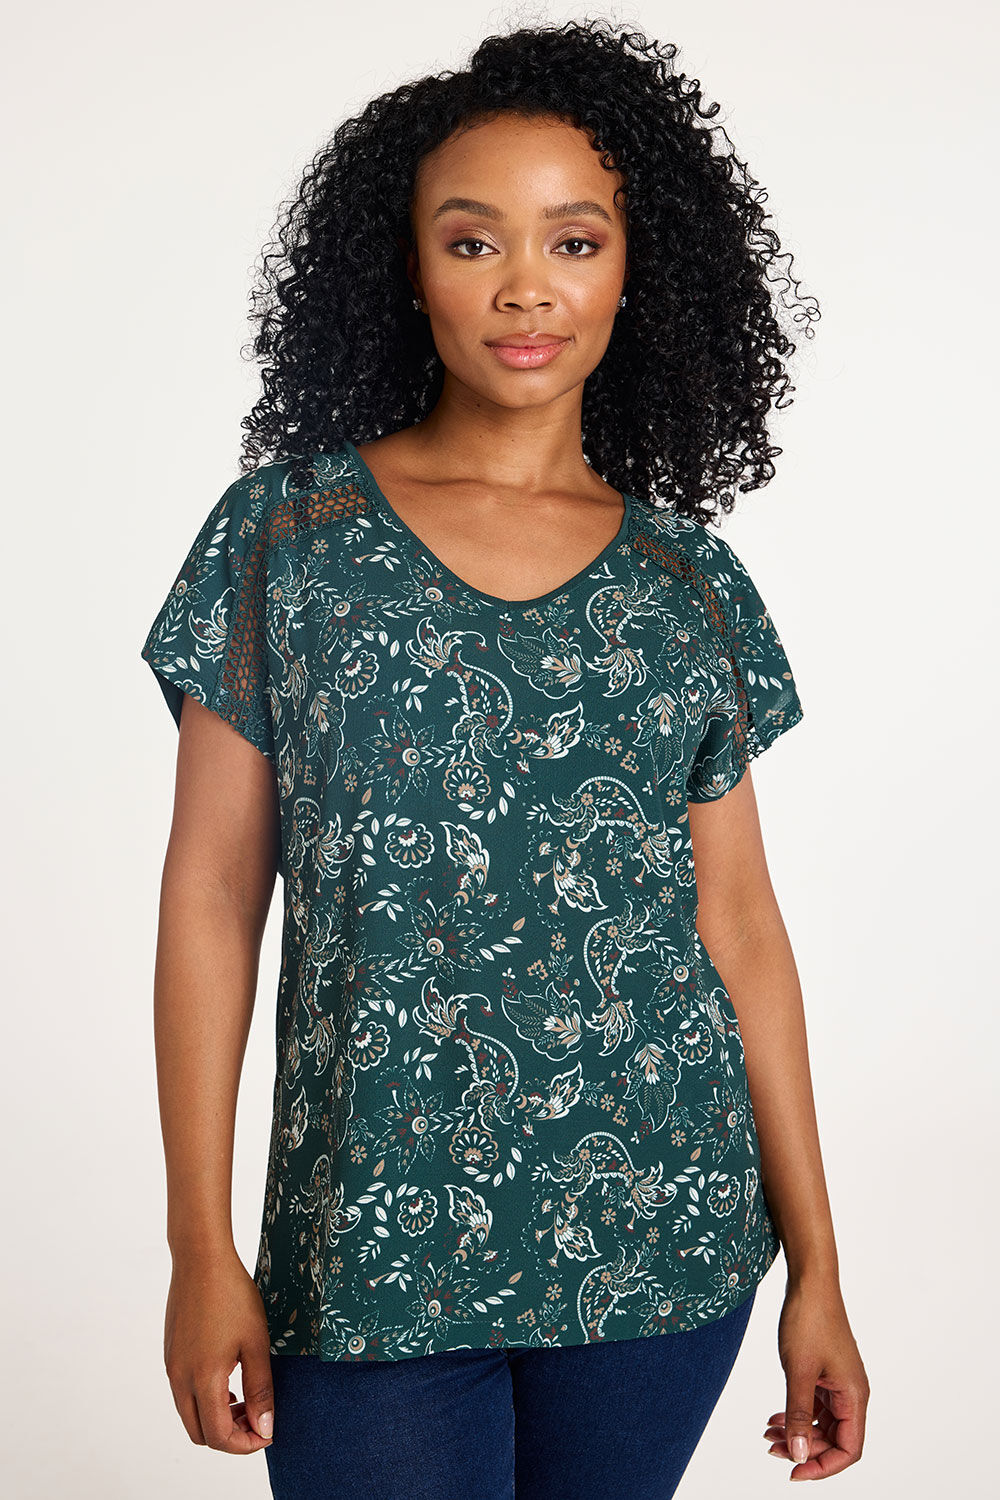 Bonmarche Green Short Sleeve Paisley Print Woven Front Top, Size: 14